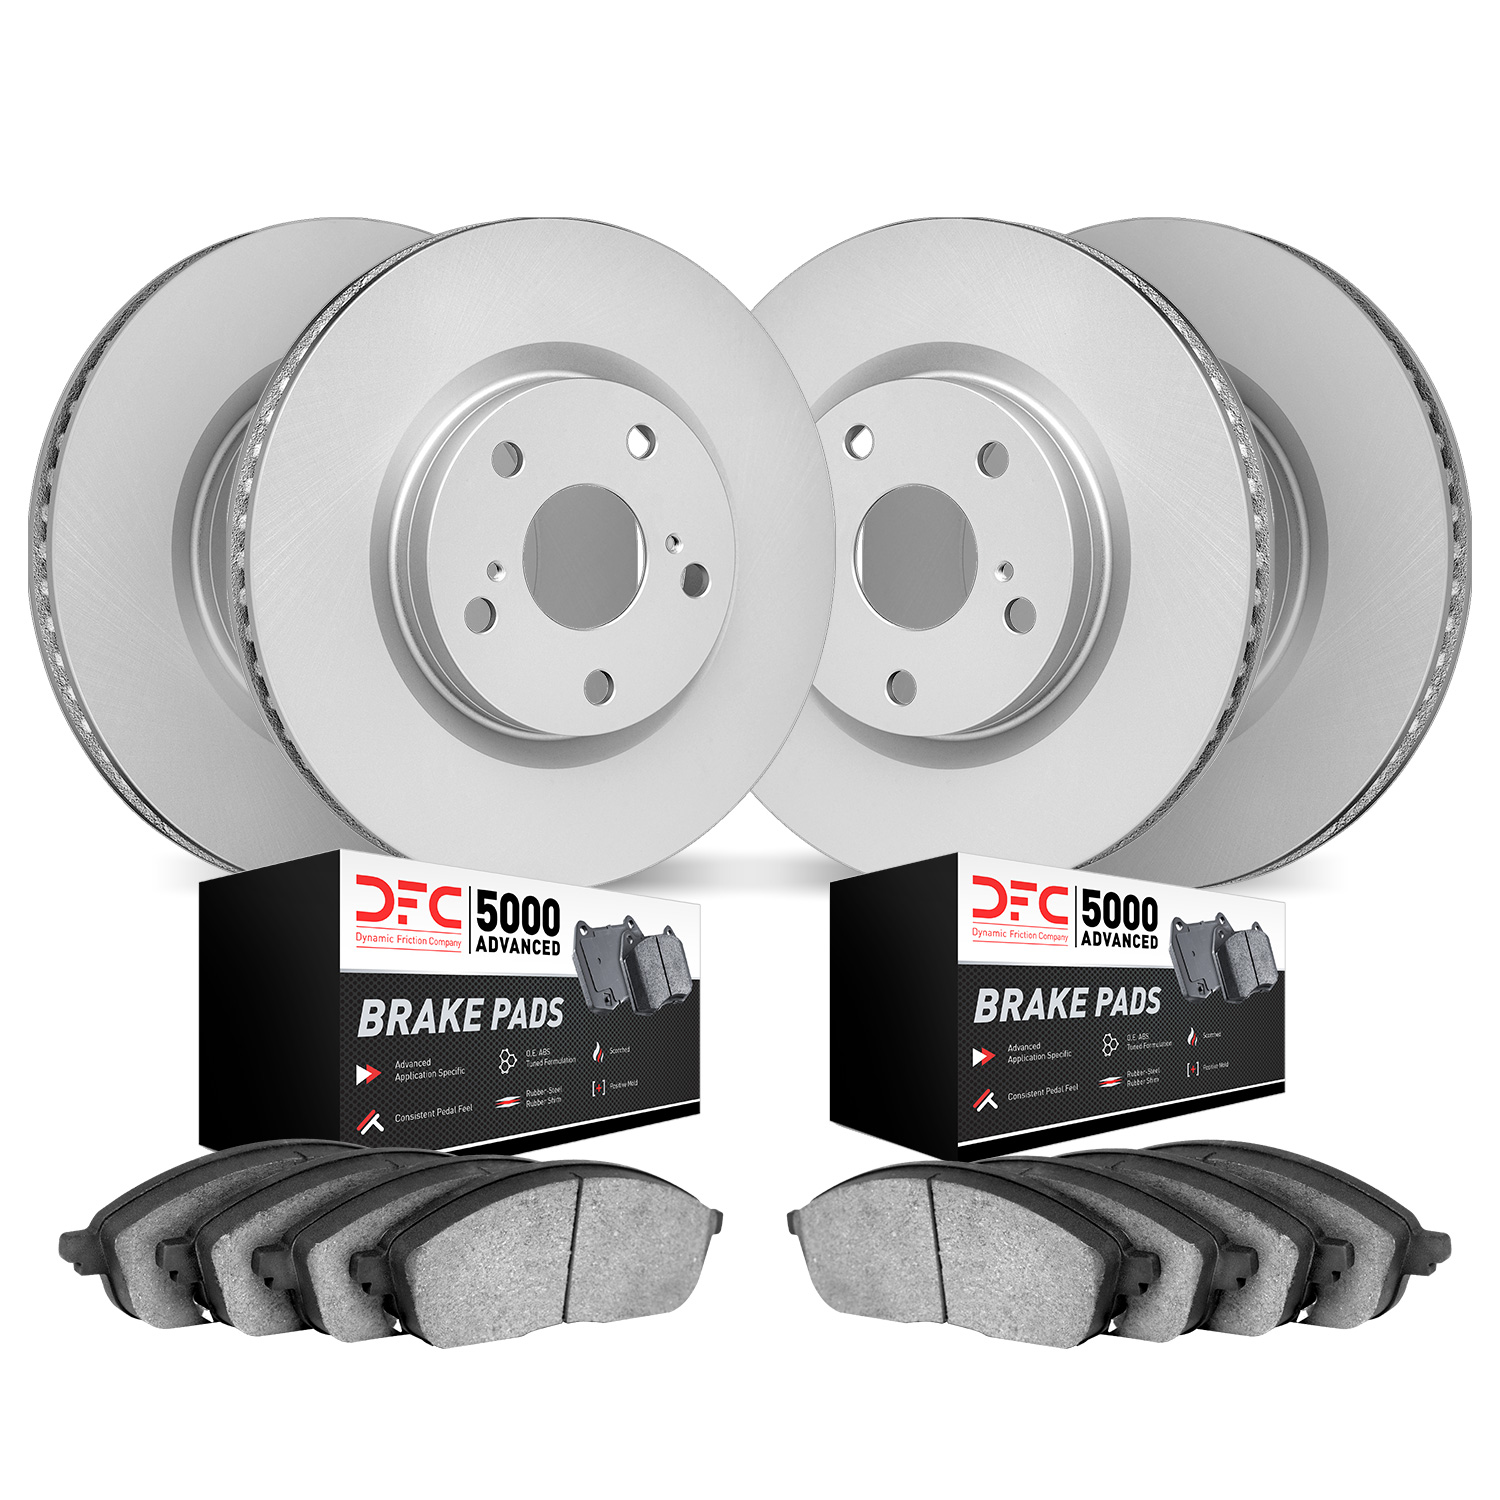 4504-31140 Geospec Brake Rotors w/5000 Advanced Brake Pads Kit, Fits Select Multiple Makes/Models, Position: Front and Rear